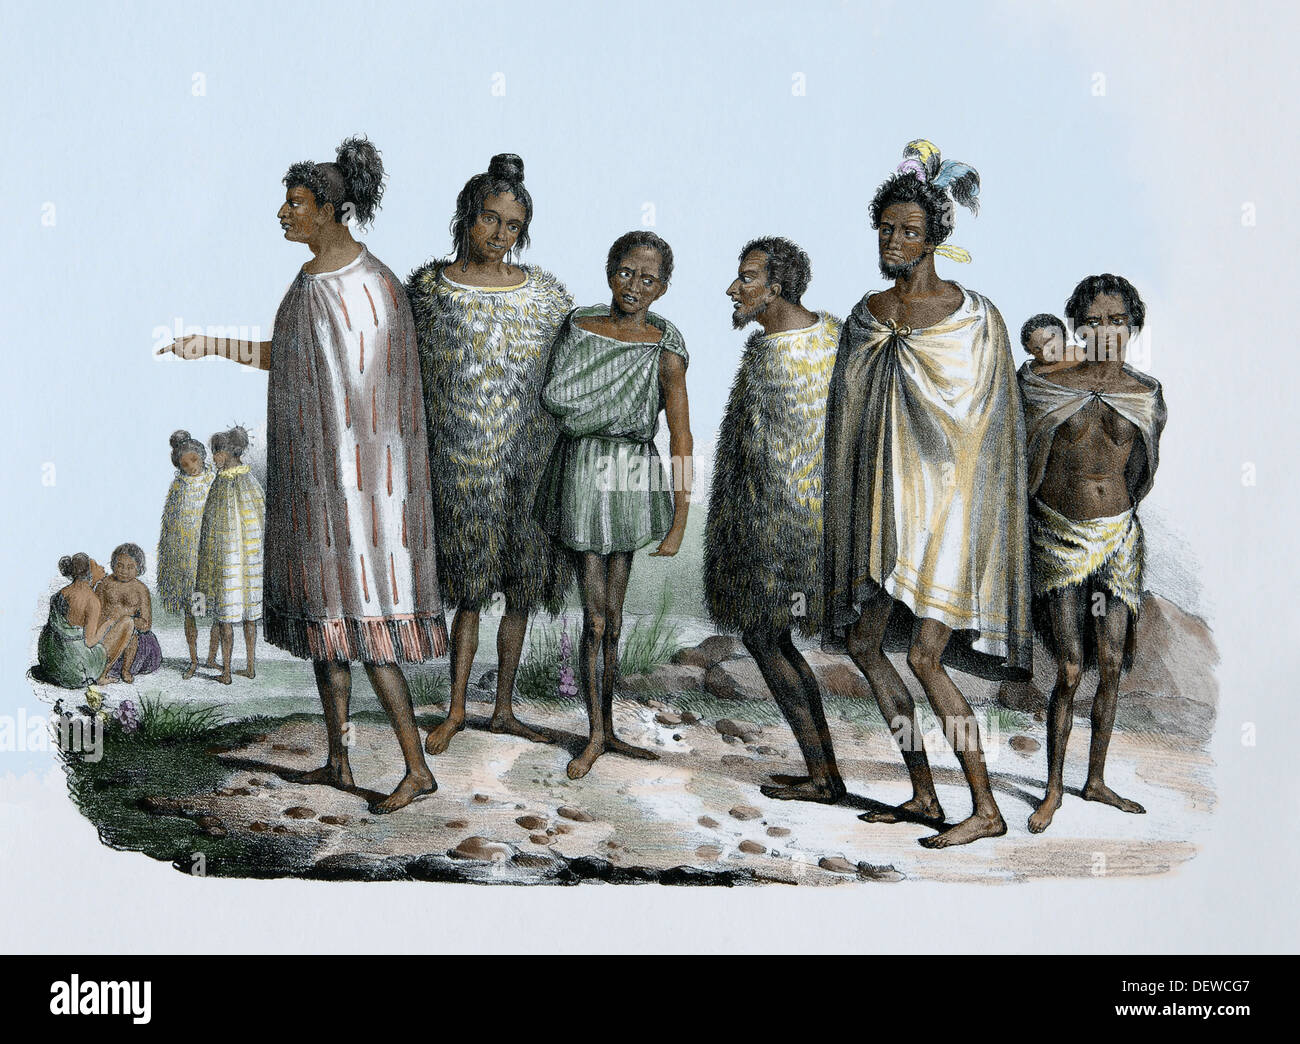 Pacific Islands. New Zealanders, c. 1840. Indigenous polynesian people. Maori culture. Colored engraving. 19th century. Stock Photo